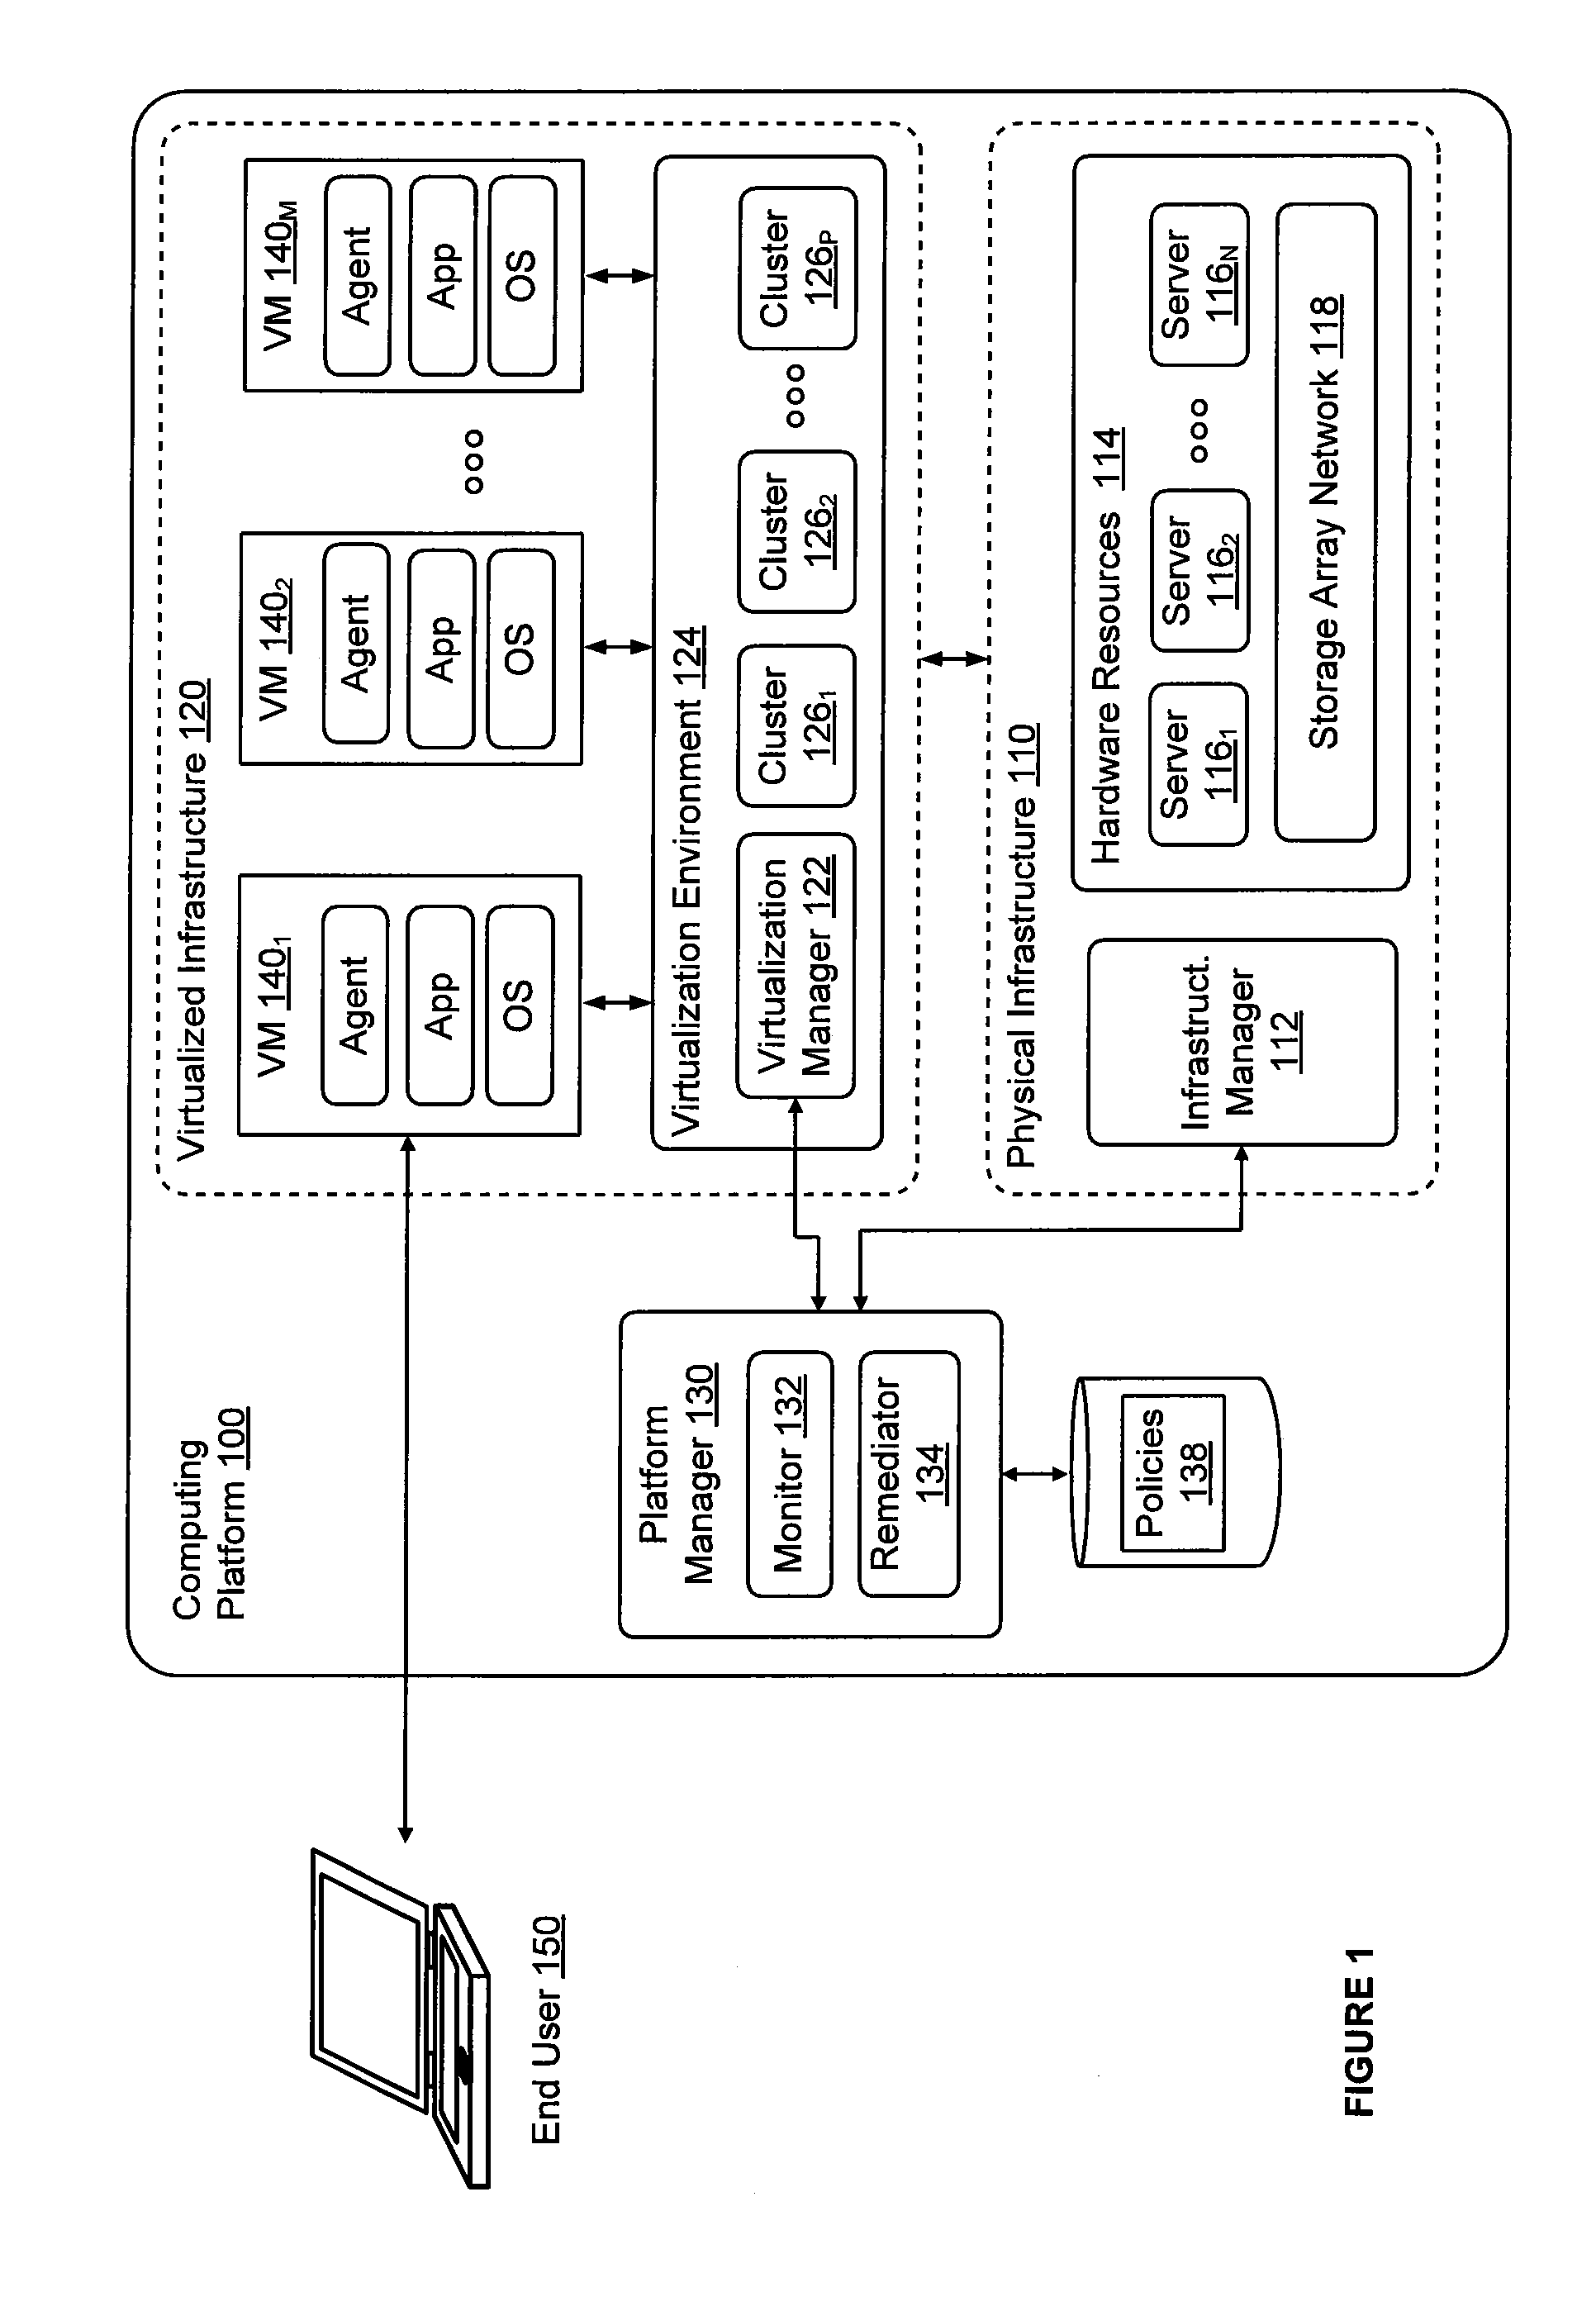 Automatic monitoring and just-in-time resource provisioning system